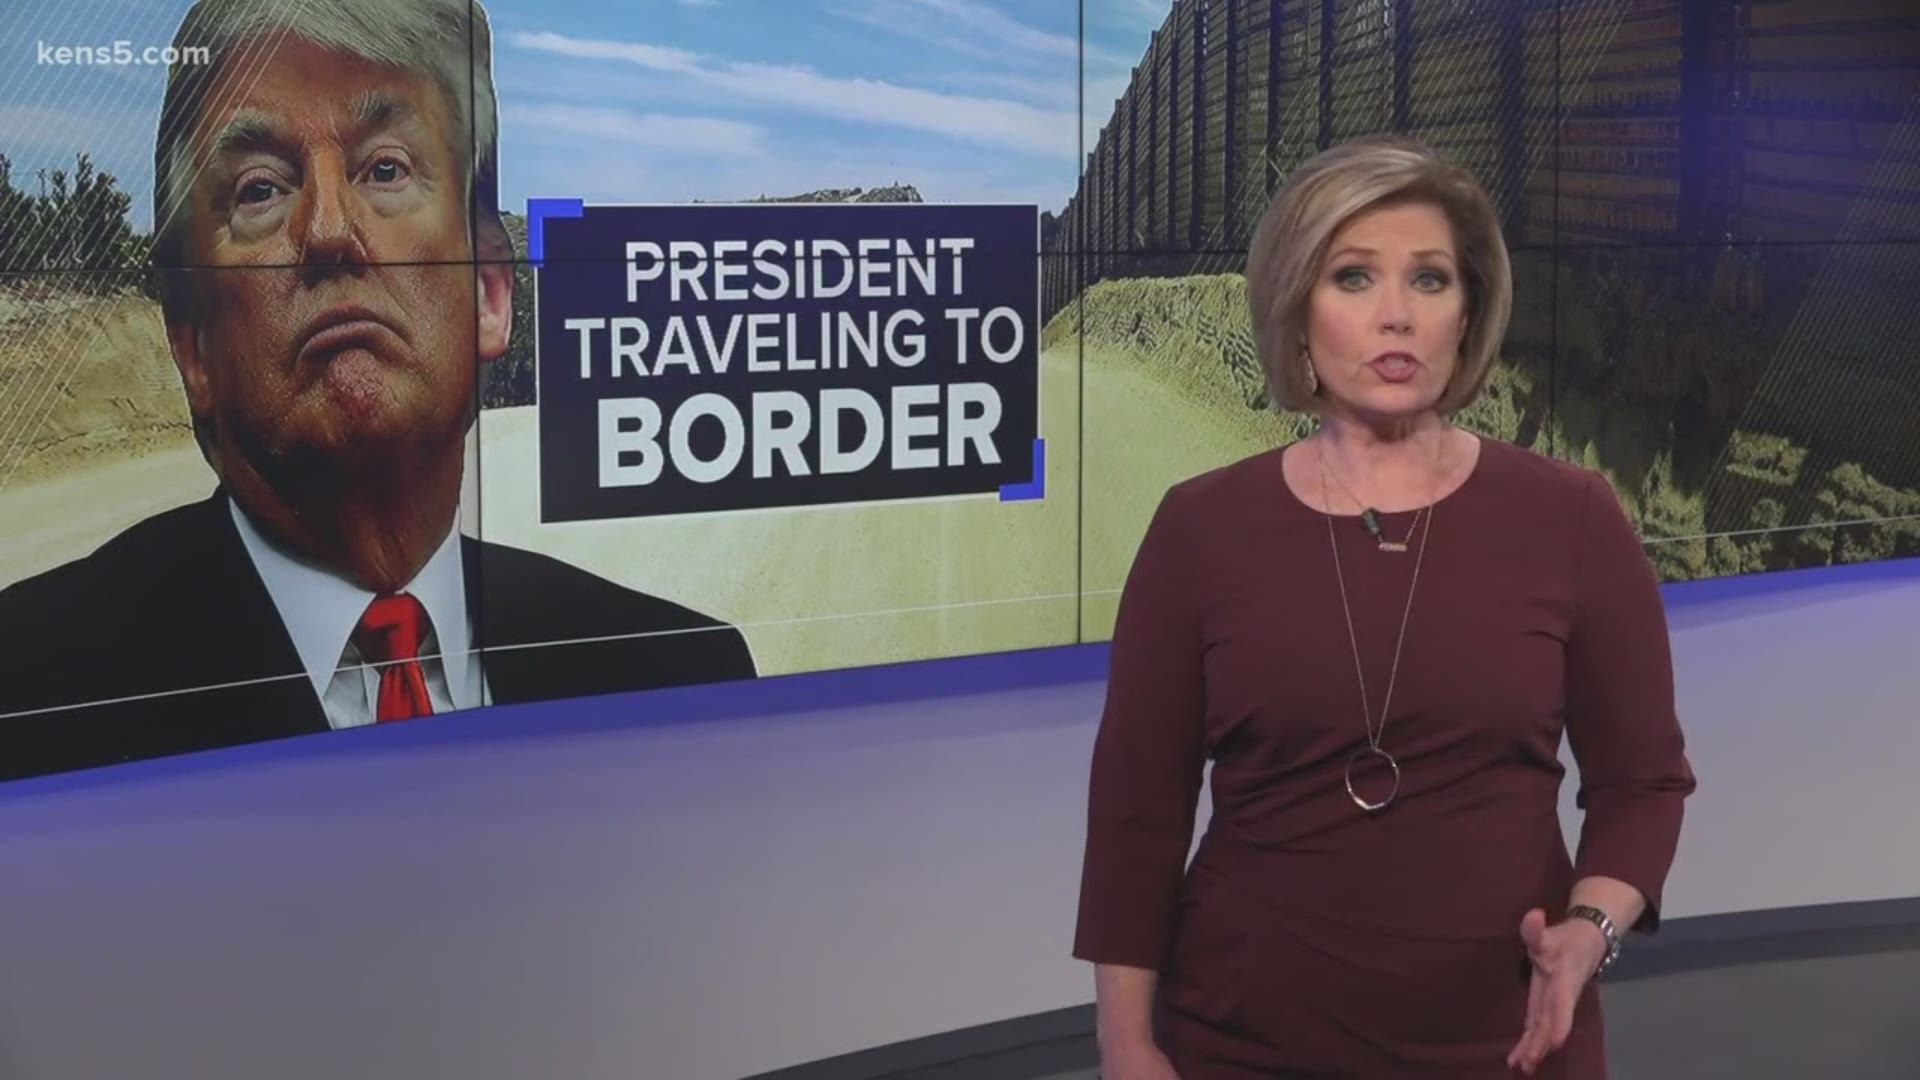 The president will visit the Texas border on Thursday to see firsthand what he calls a crisis in the region. But do local leaders along the border agree? Border reporter Oscar Margain brings us their reactions.